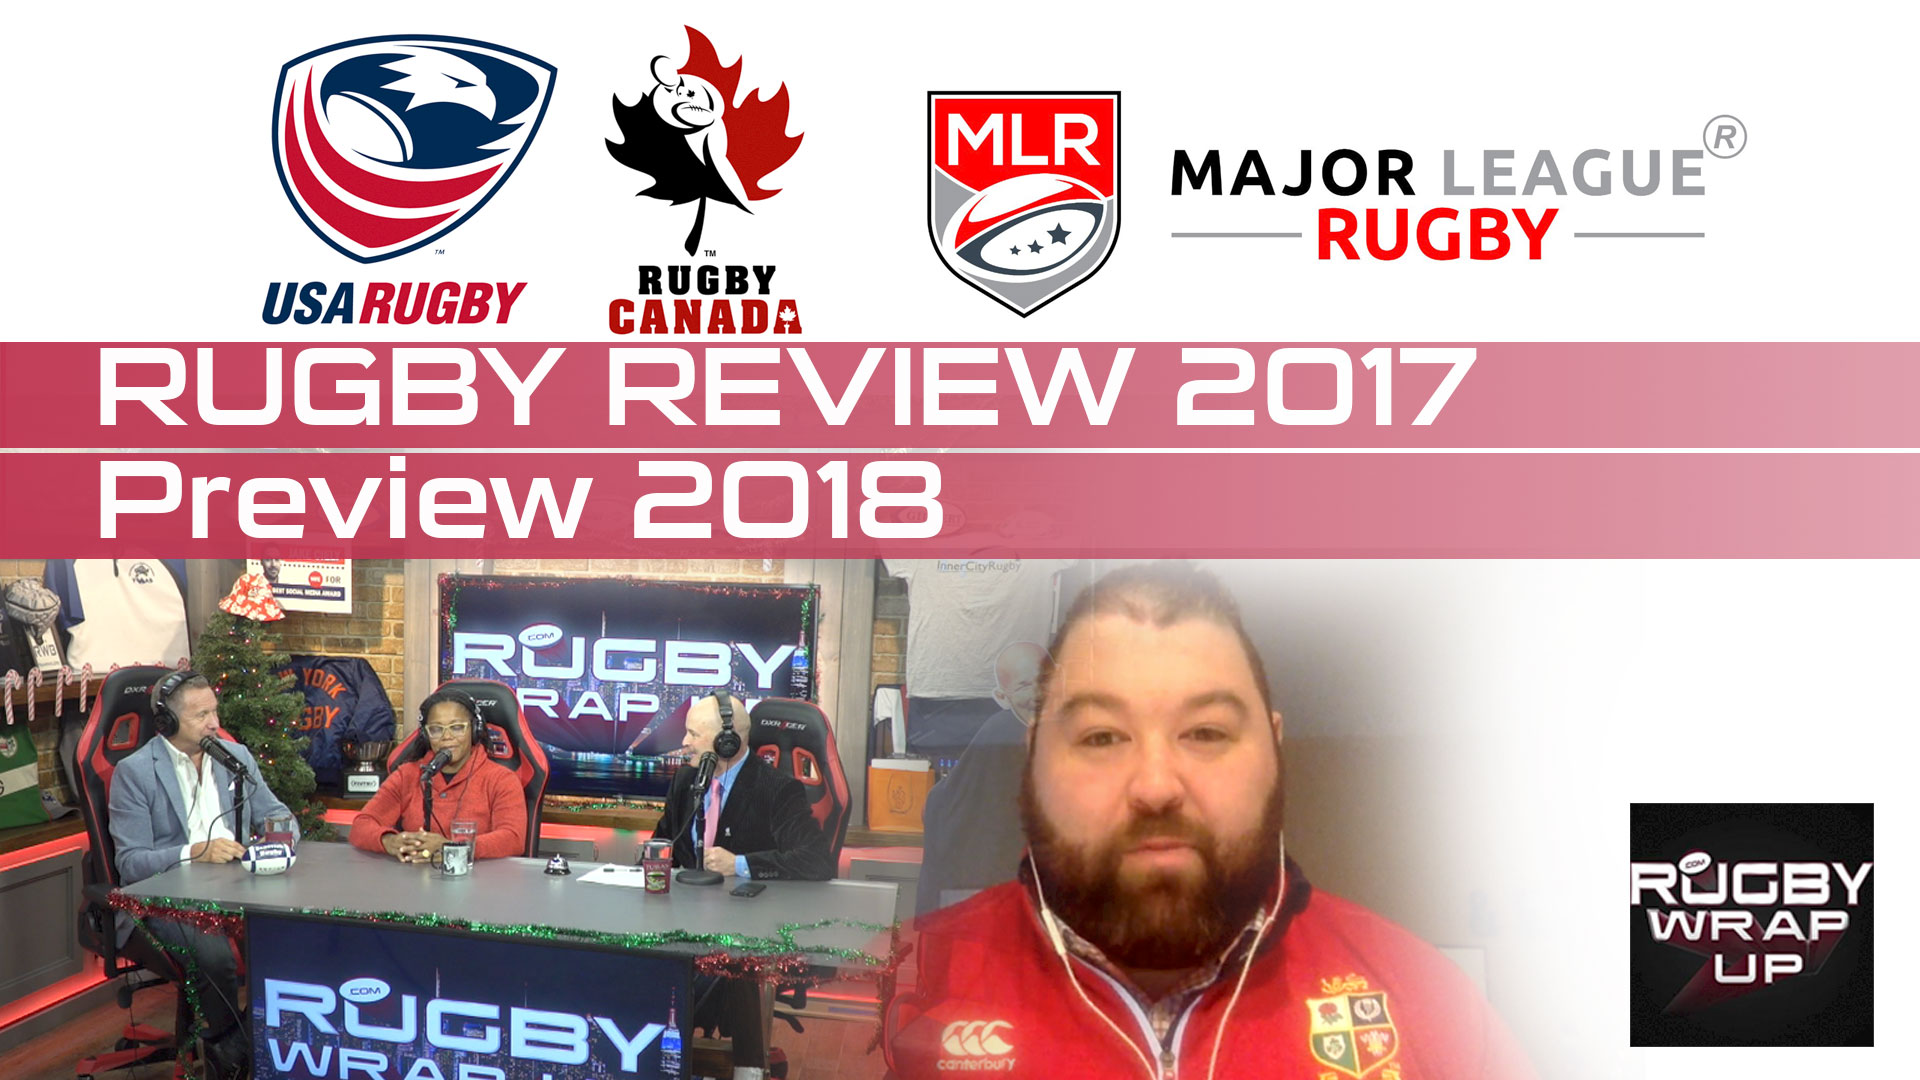 Champions Cup Analysis, Citing Critiques. Phaidra Knight, Dan Tanner, Steve Lewis, Rugby_Wrap_Up